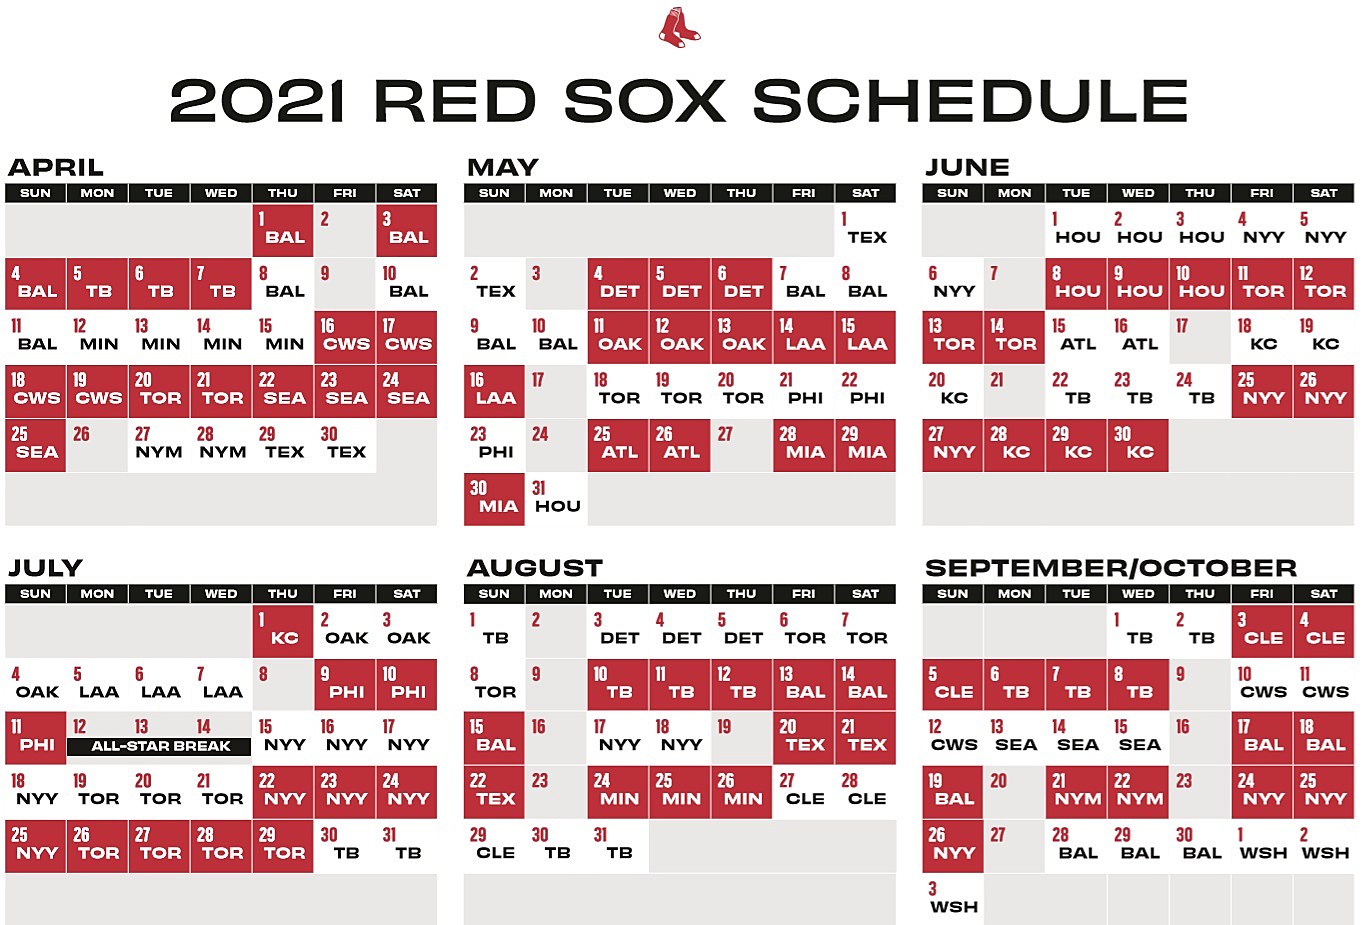 red sox mlb schedule 2019